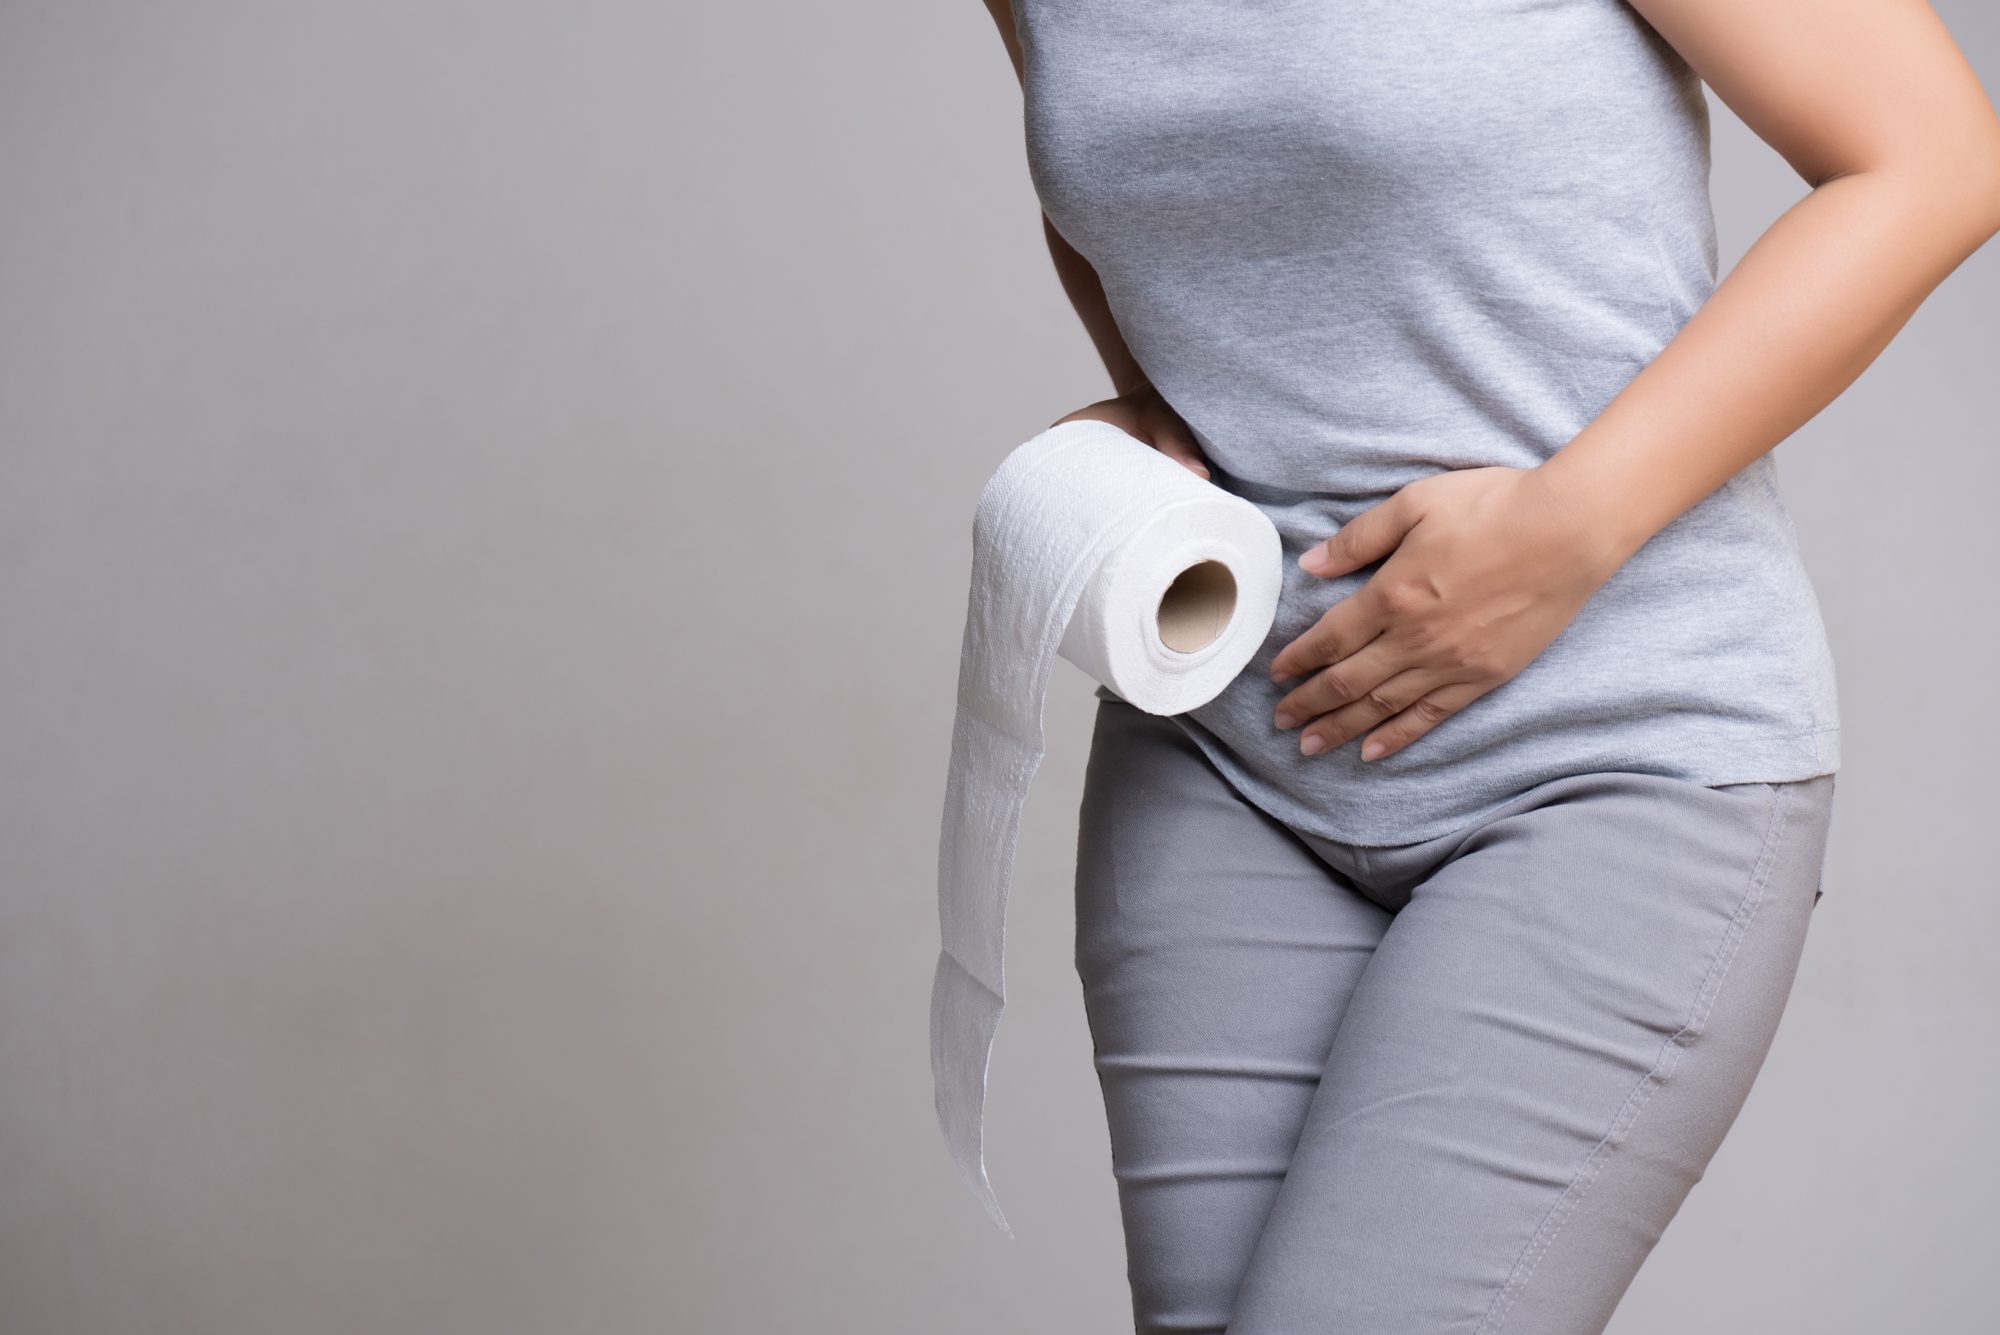 Bladder Control Underwear and Flushable Wipes - health and beauty